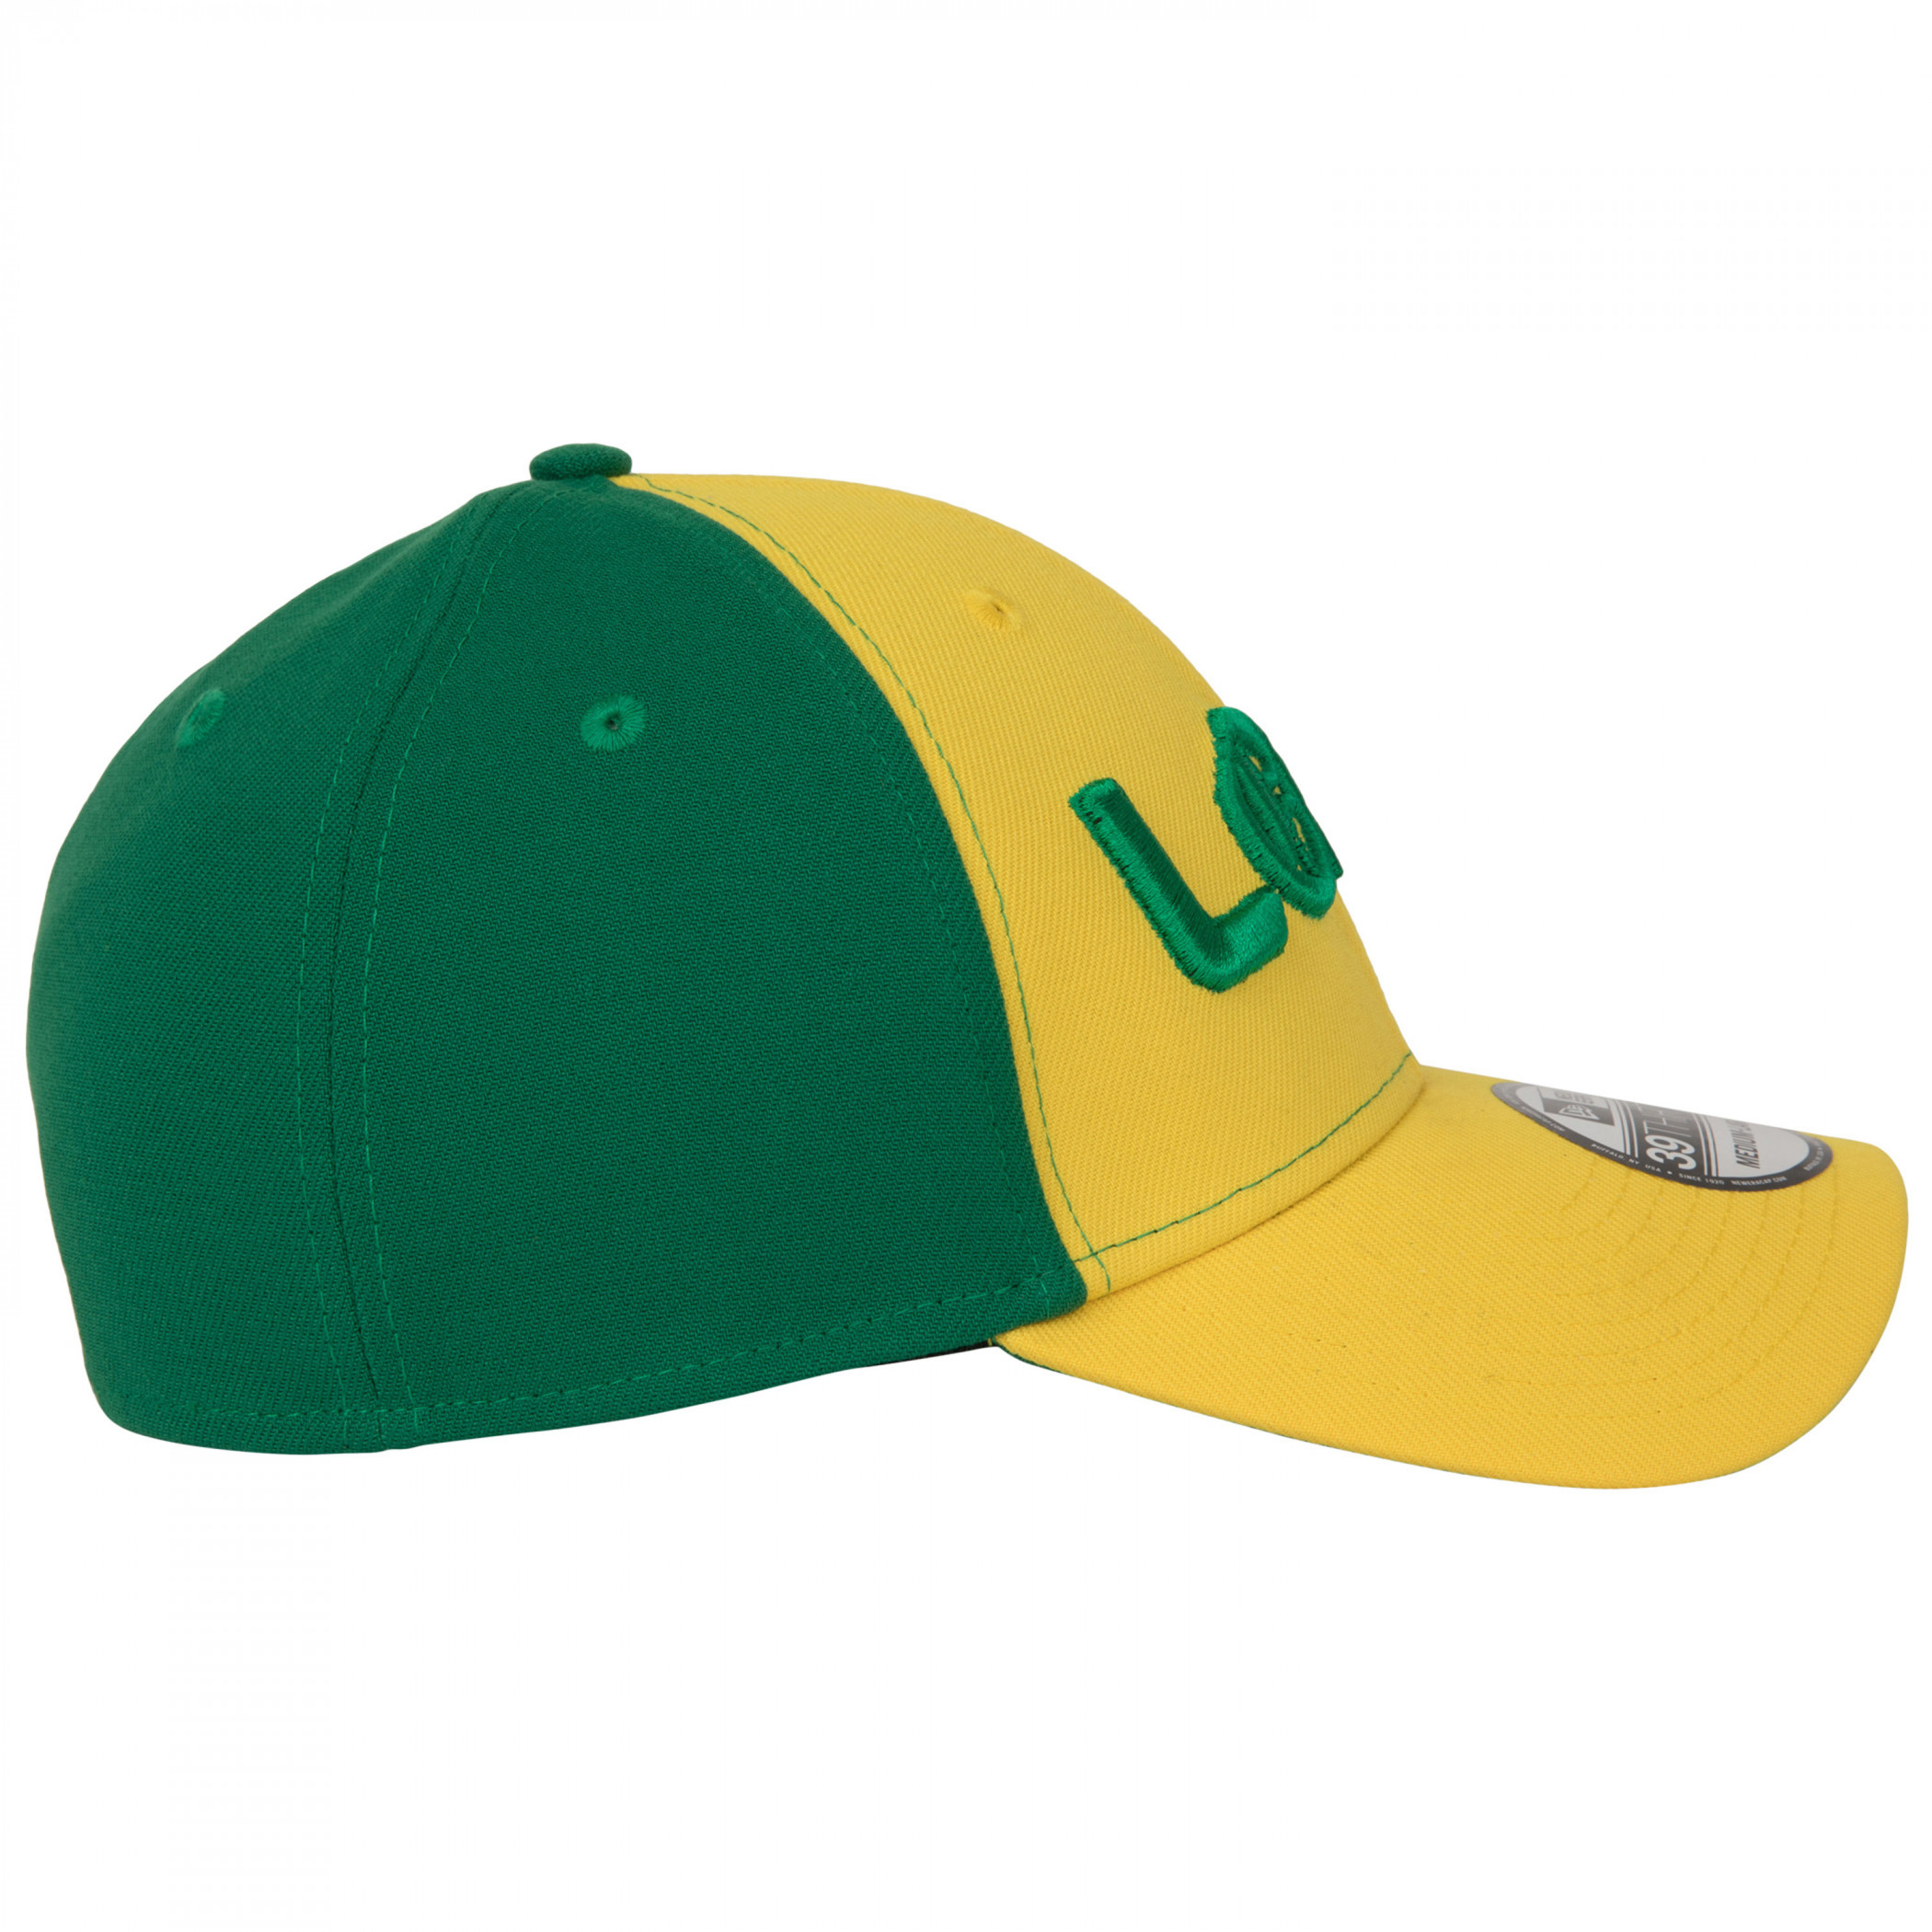 Loki Marvel Studios Yellow & Green Colorway New Era 39Thirty Fitted Hat